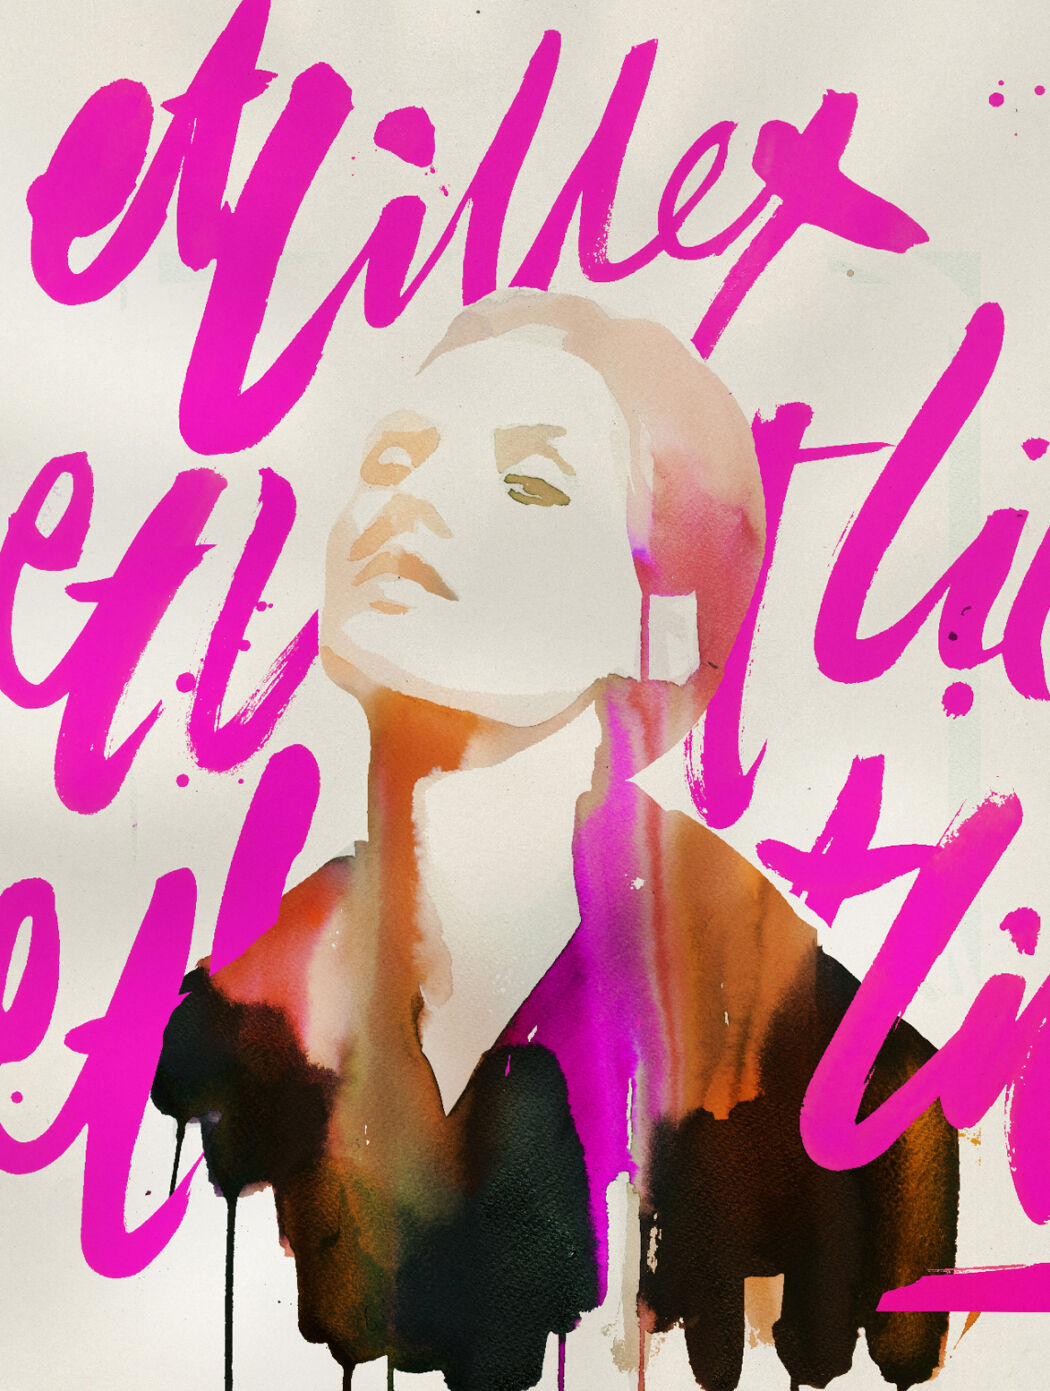 Editorial fashion and beauty illustration by Stina Persson